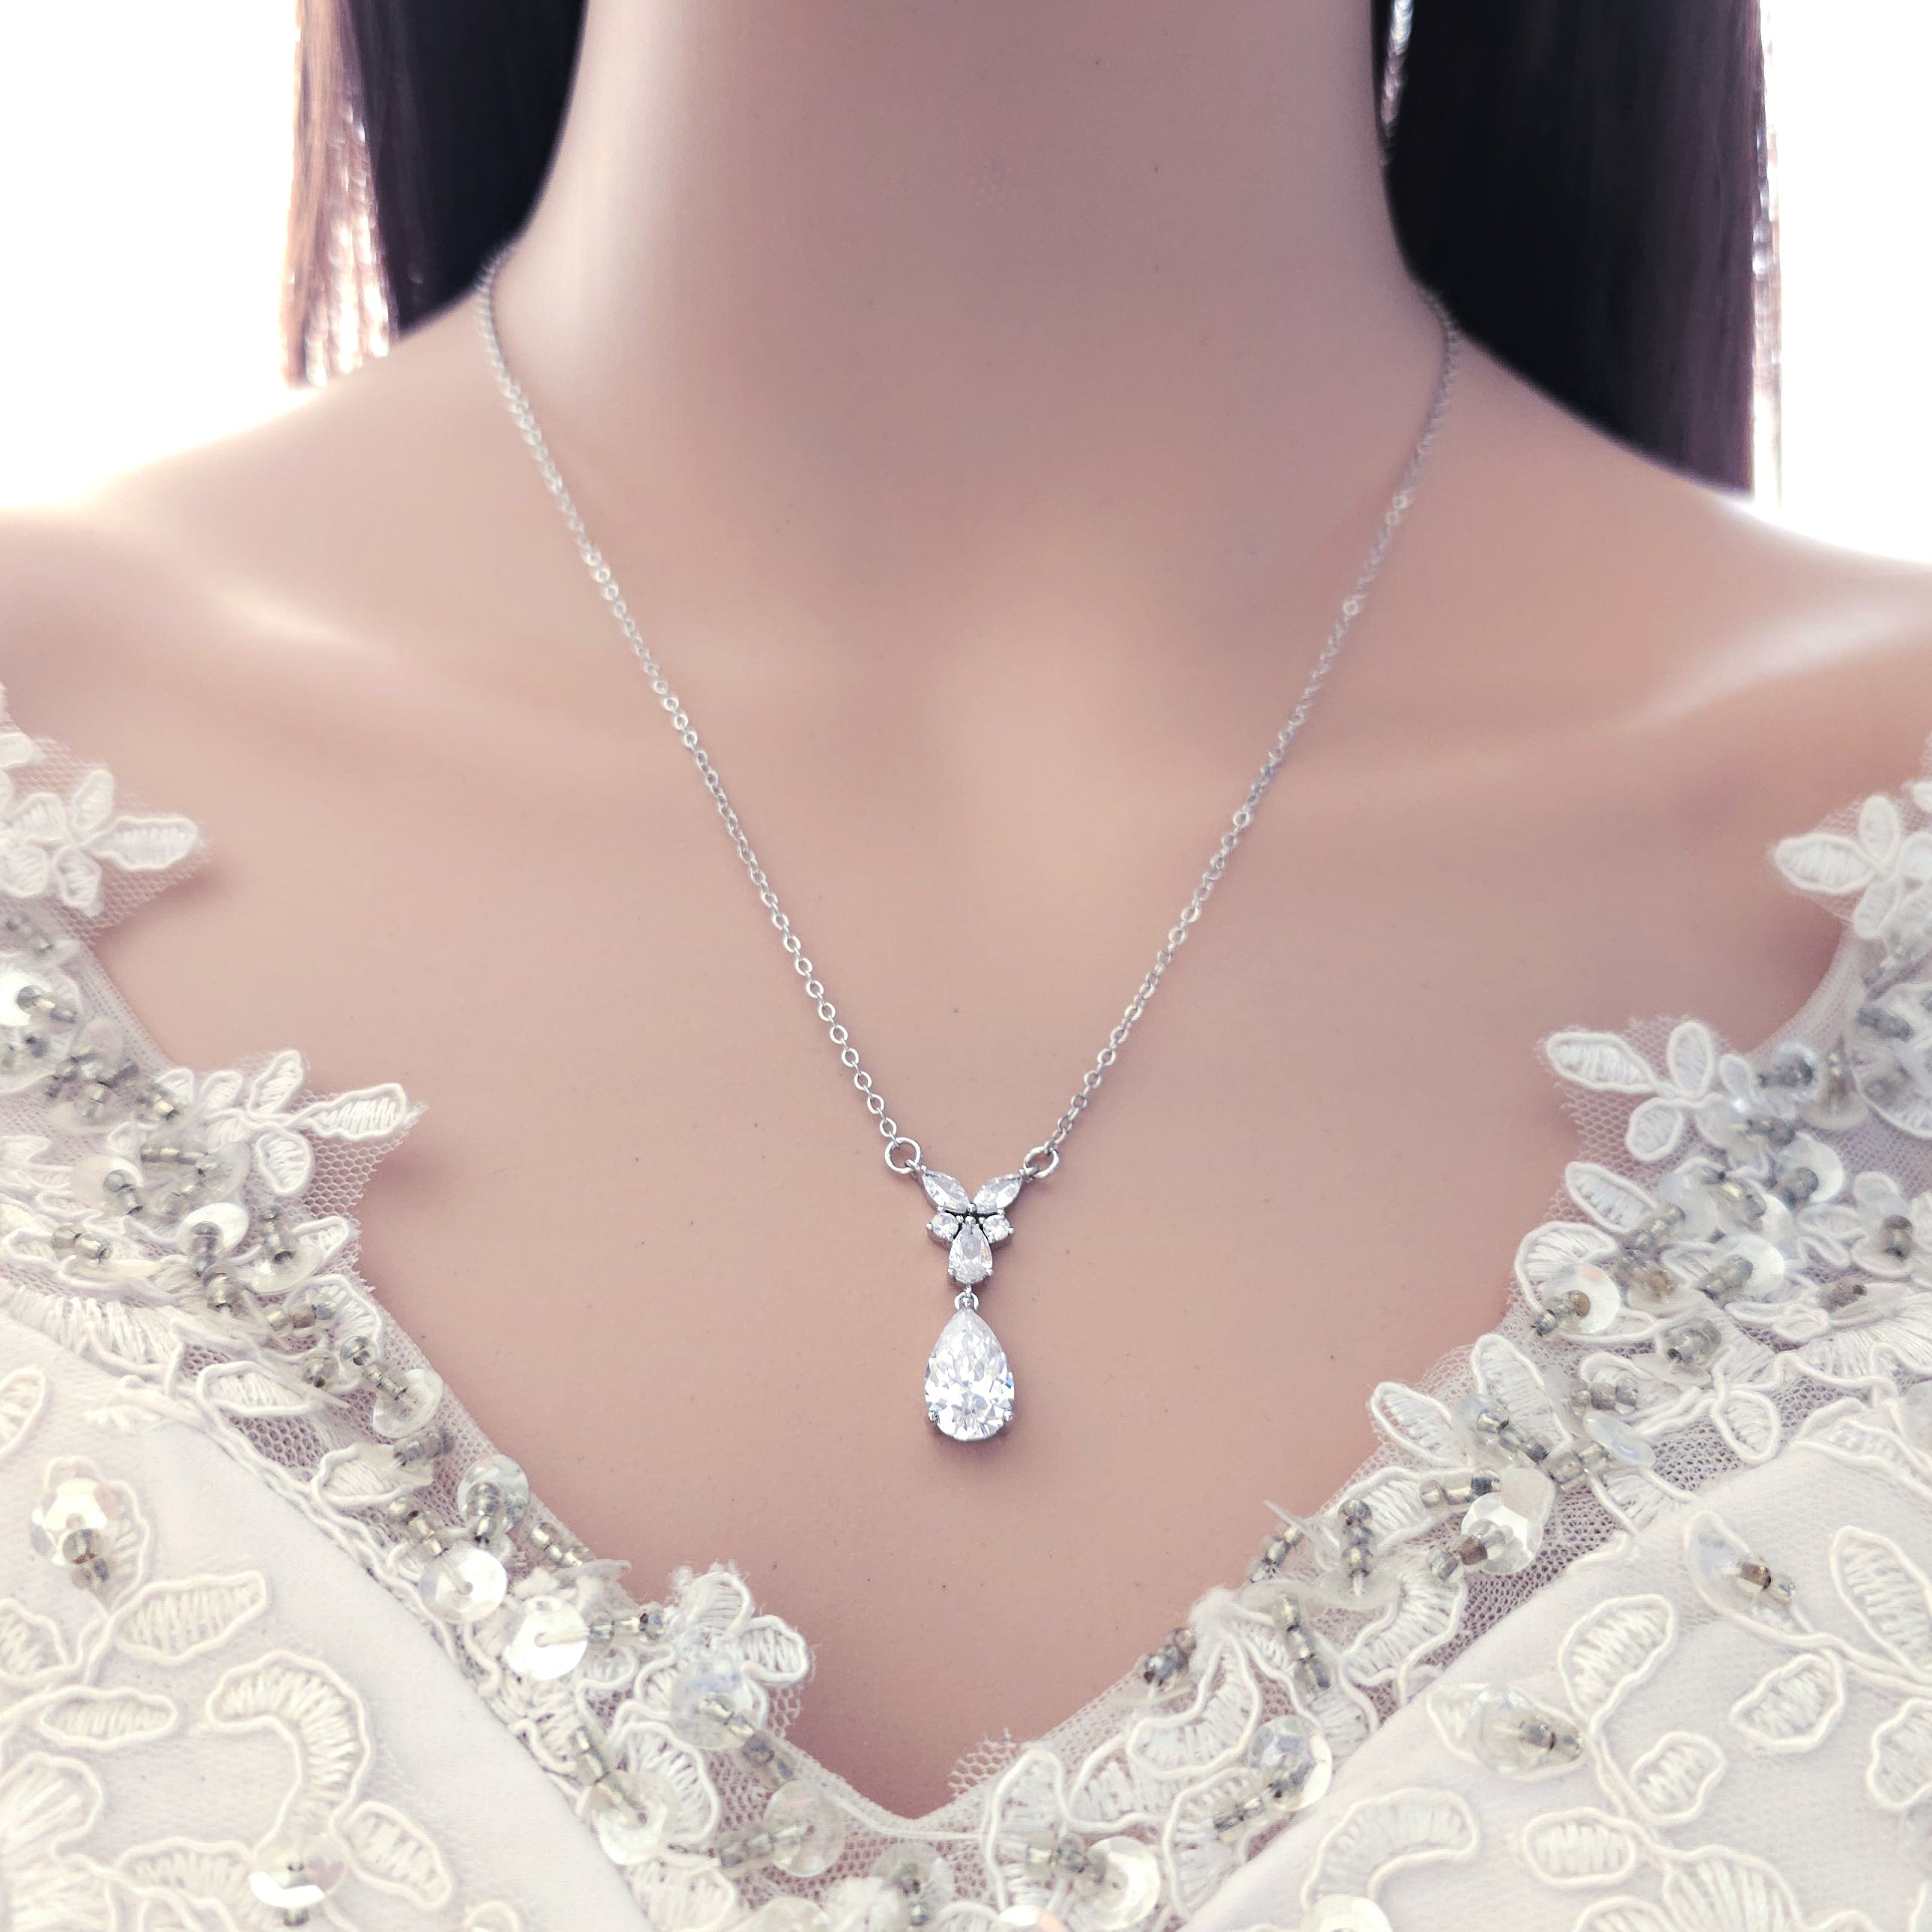 Luxury Moissanite Diamond Necklace 100% Real 925 Sterling Silver Engagement  Wedding Chain Necklace For Women Bridal Jewelry Gift - Necklaces -  AliExpress